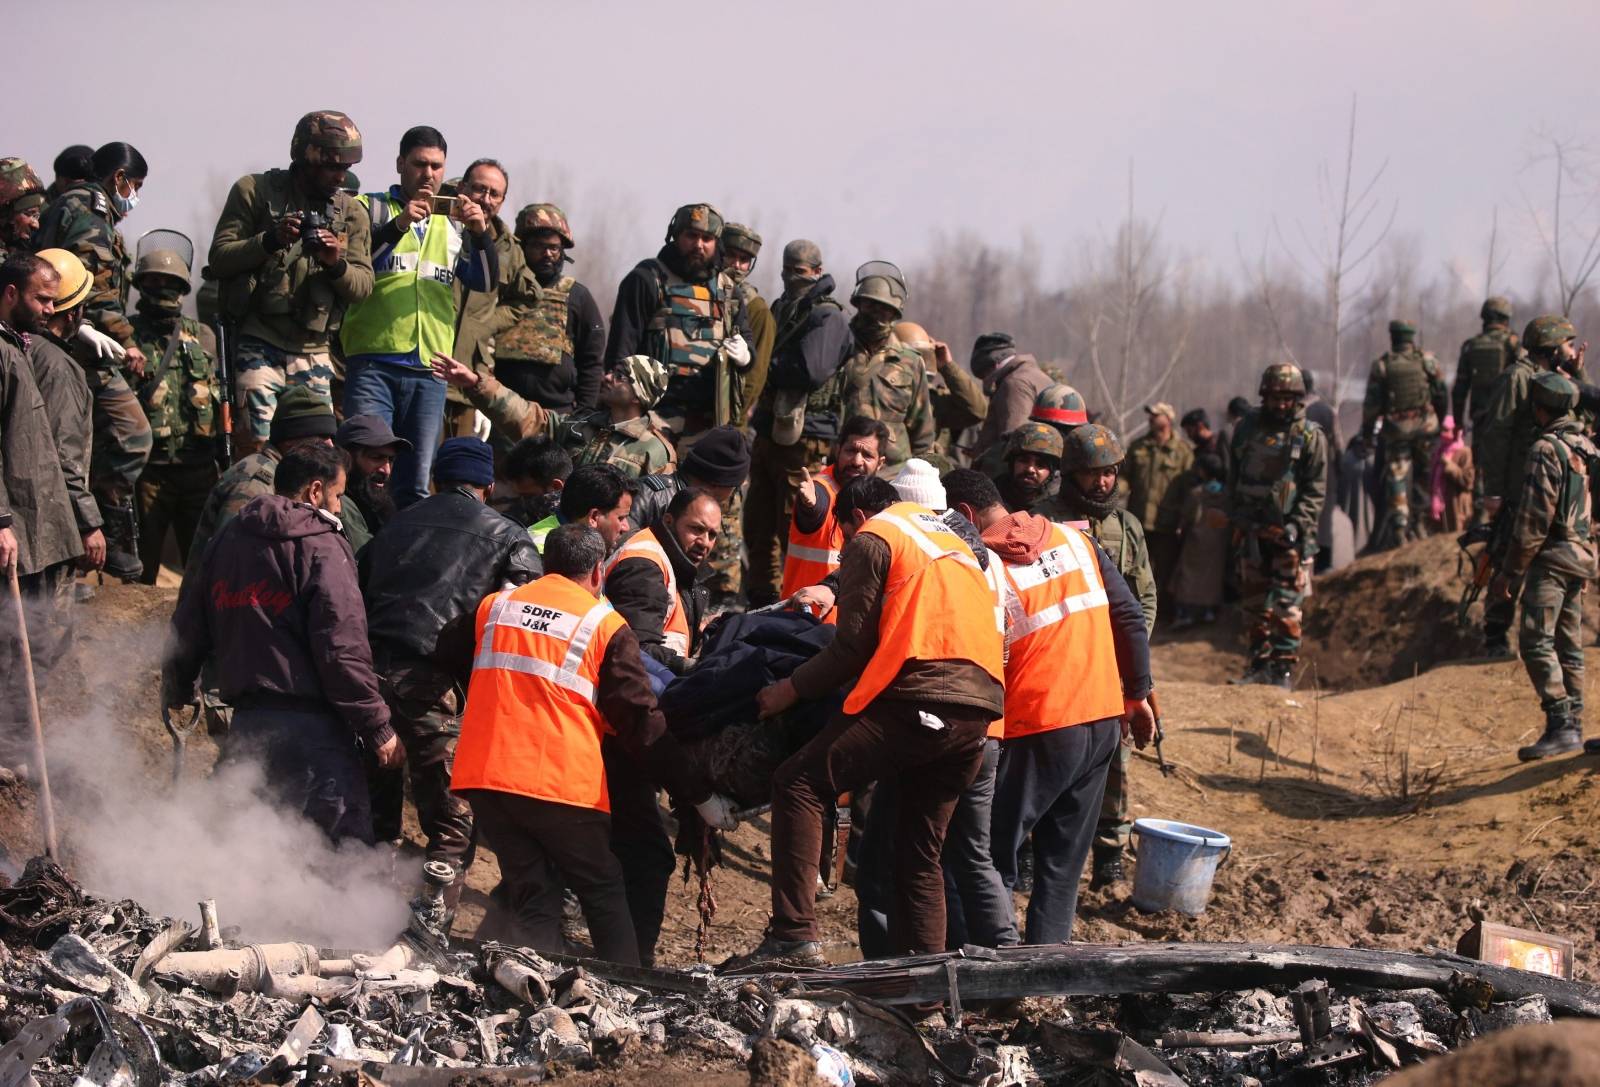 Members of State Disaster Response Force remove a body from the wreckage of Indian Air Force's helicopter after it crashed in Budgam district